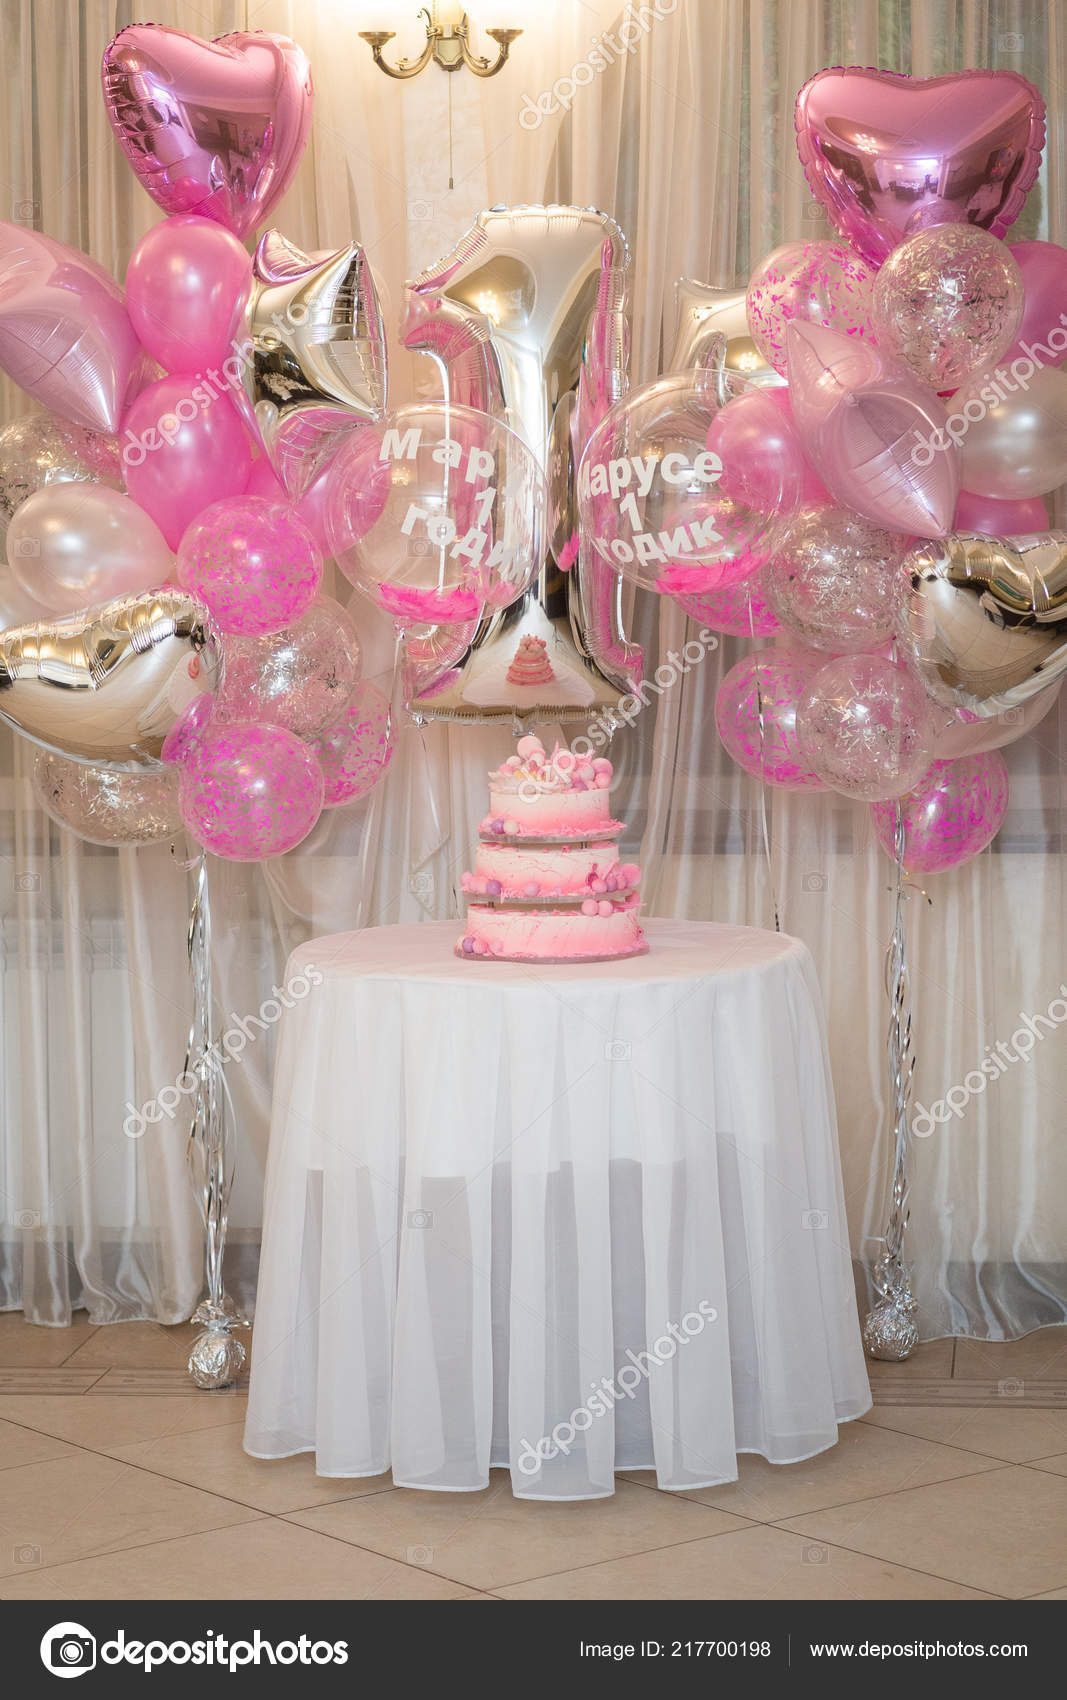 Beautiful Decorated Large Cake Several Tiers First Birthday Background Decor  Stock Photo by ©beshtanya@ 217700198